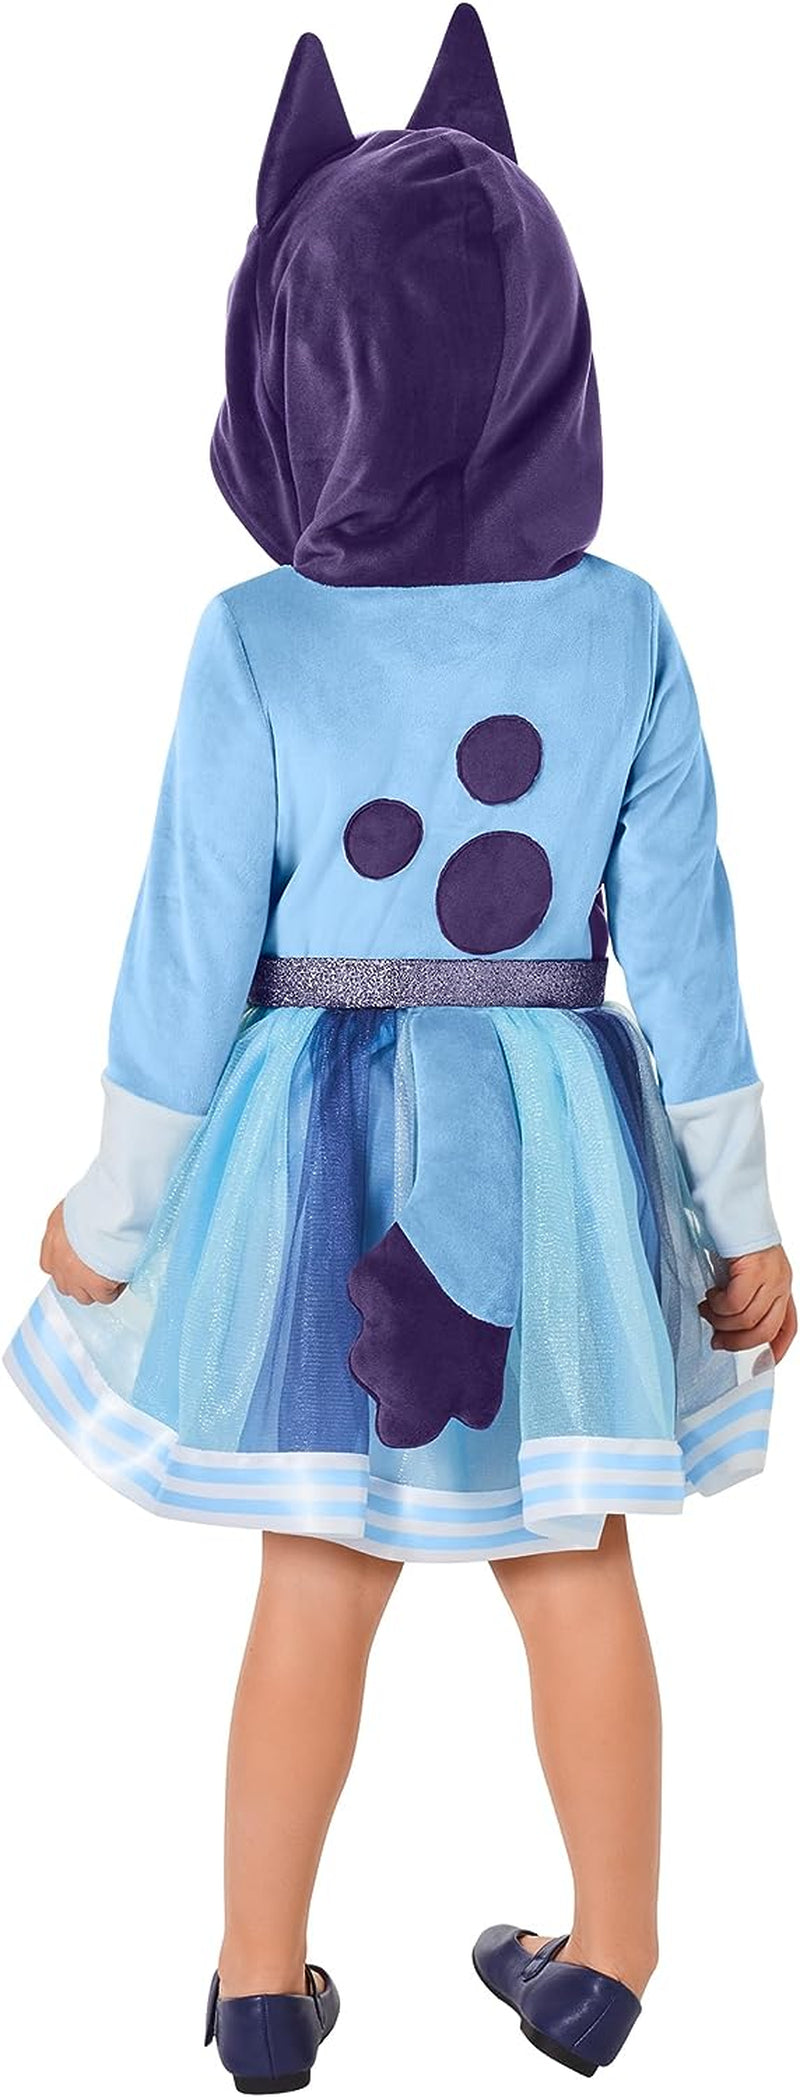 Spirit Halloween Bluey Toddler Costume | Officially Licensed | Theatrical Halloween Outfit